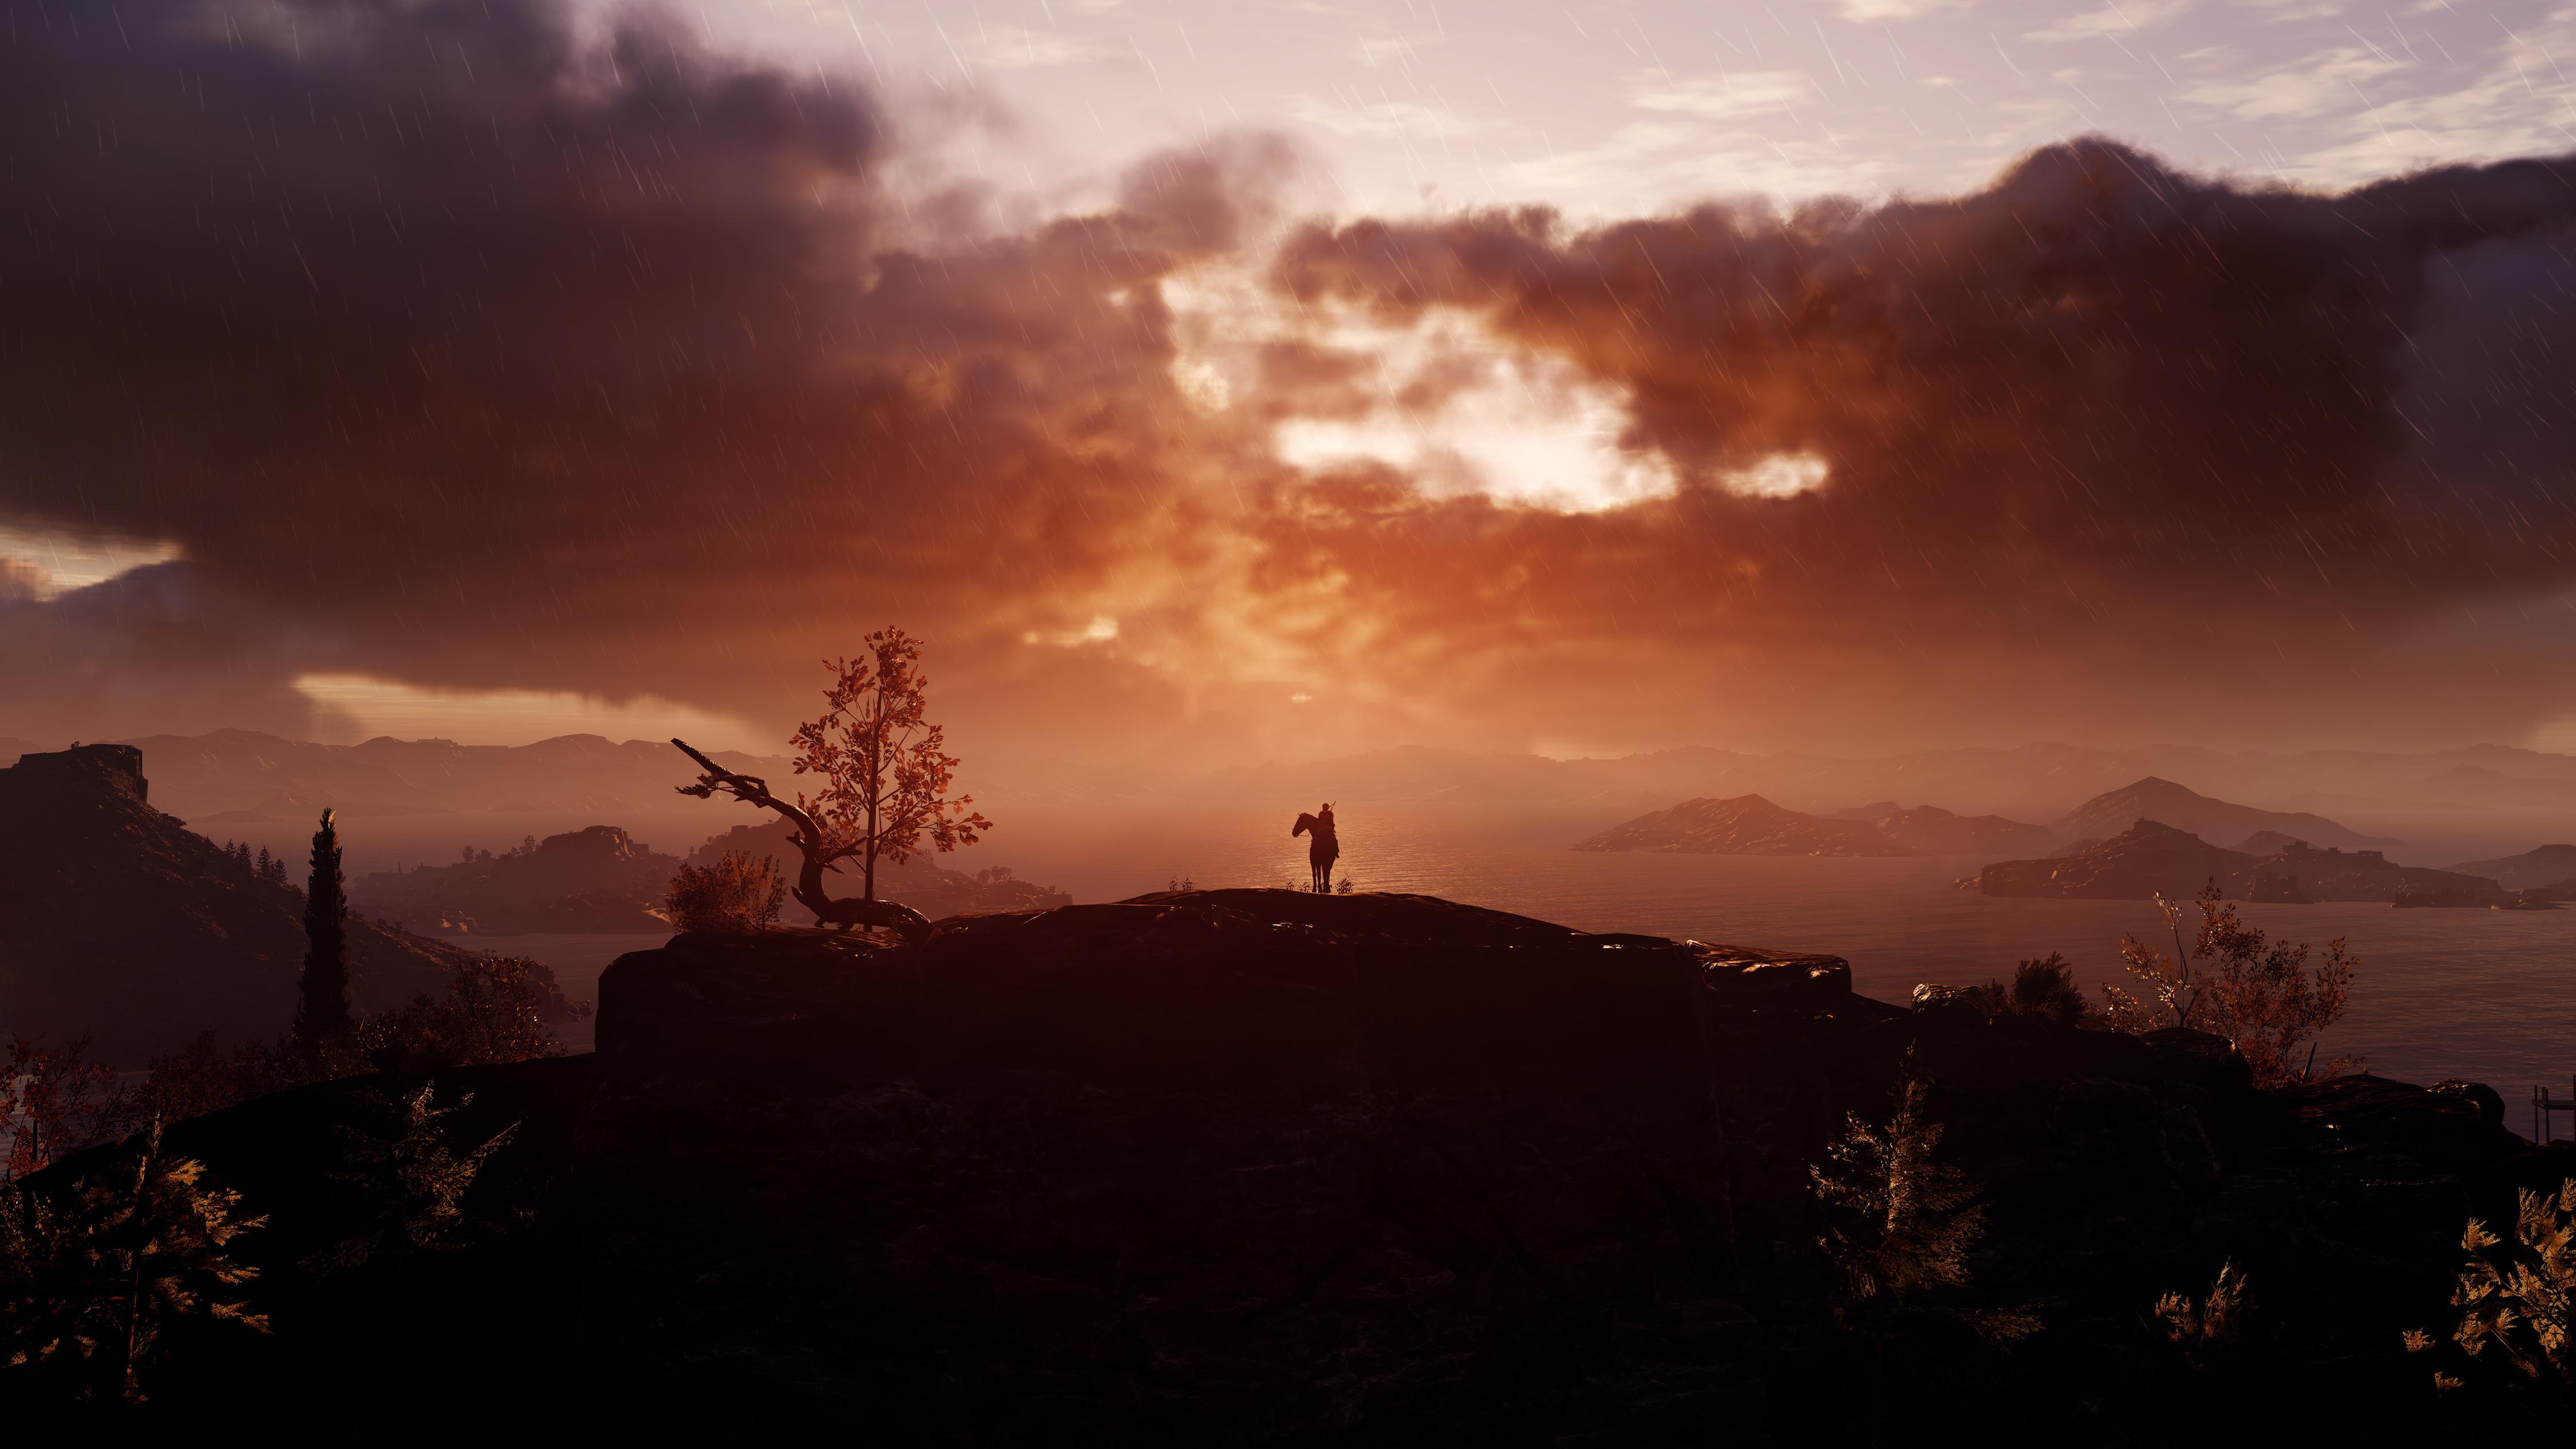 Assassins Creed Odyssey End Of The Day, HD Games, 4k Wallpaper